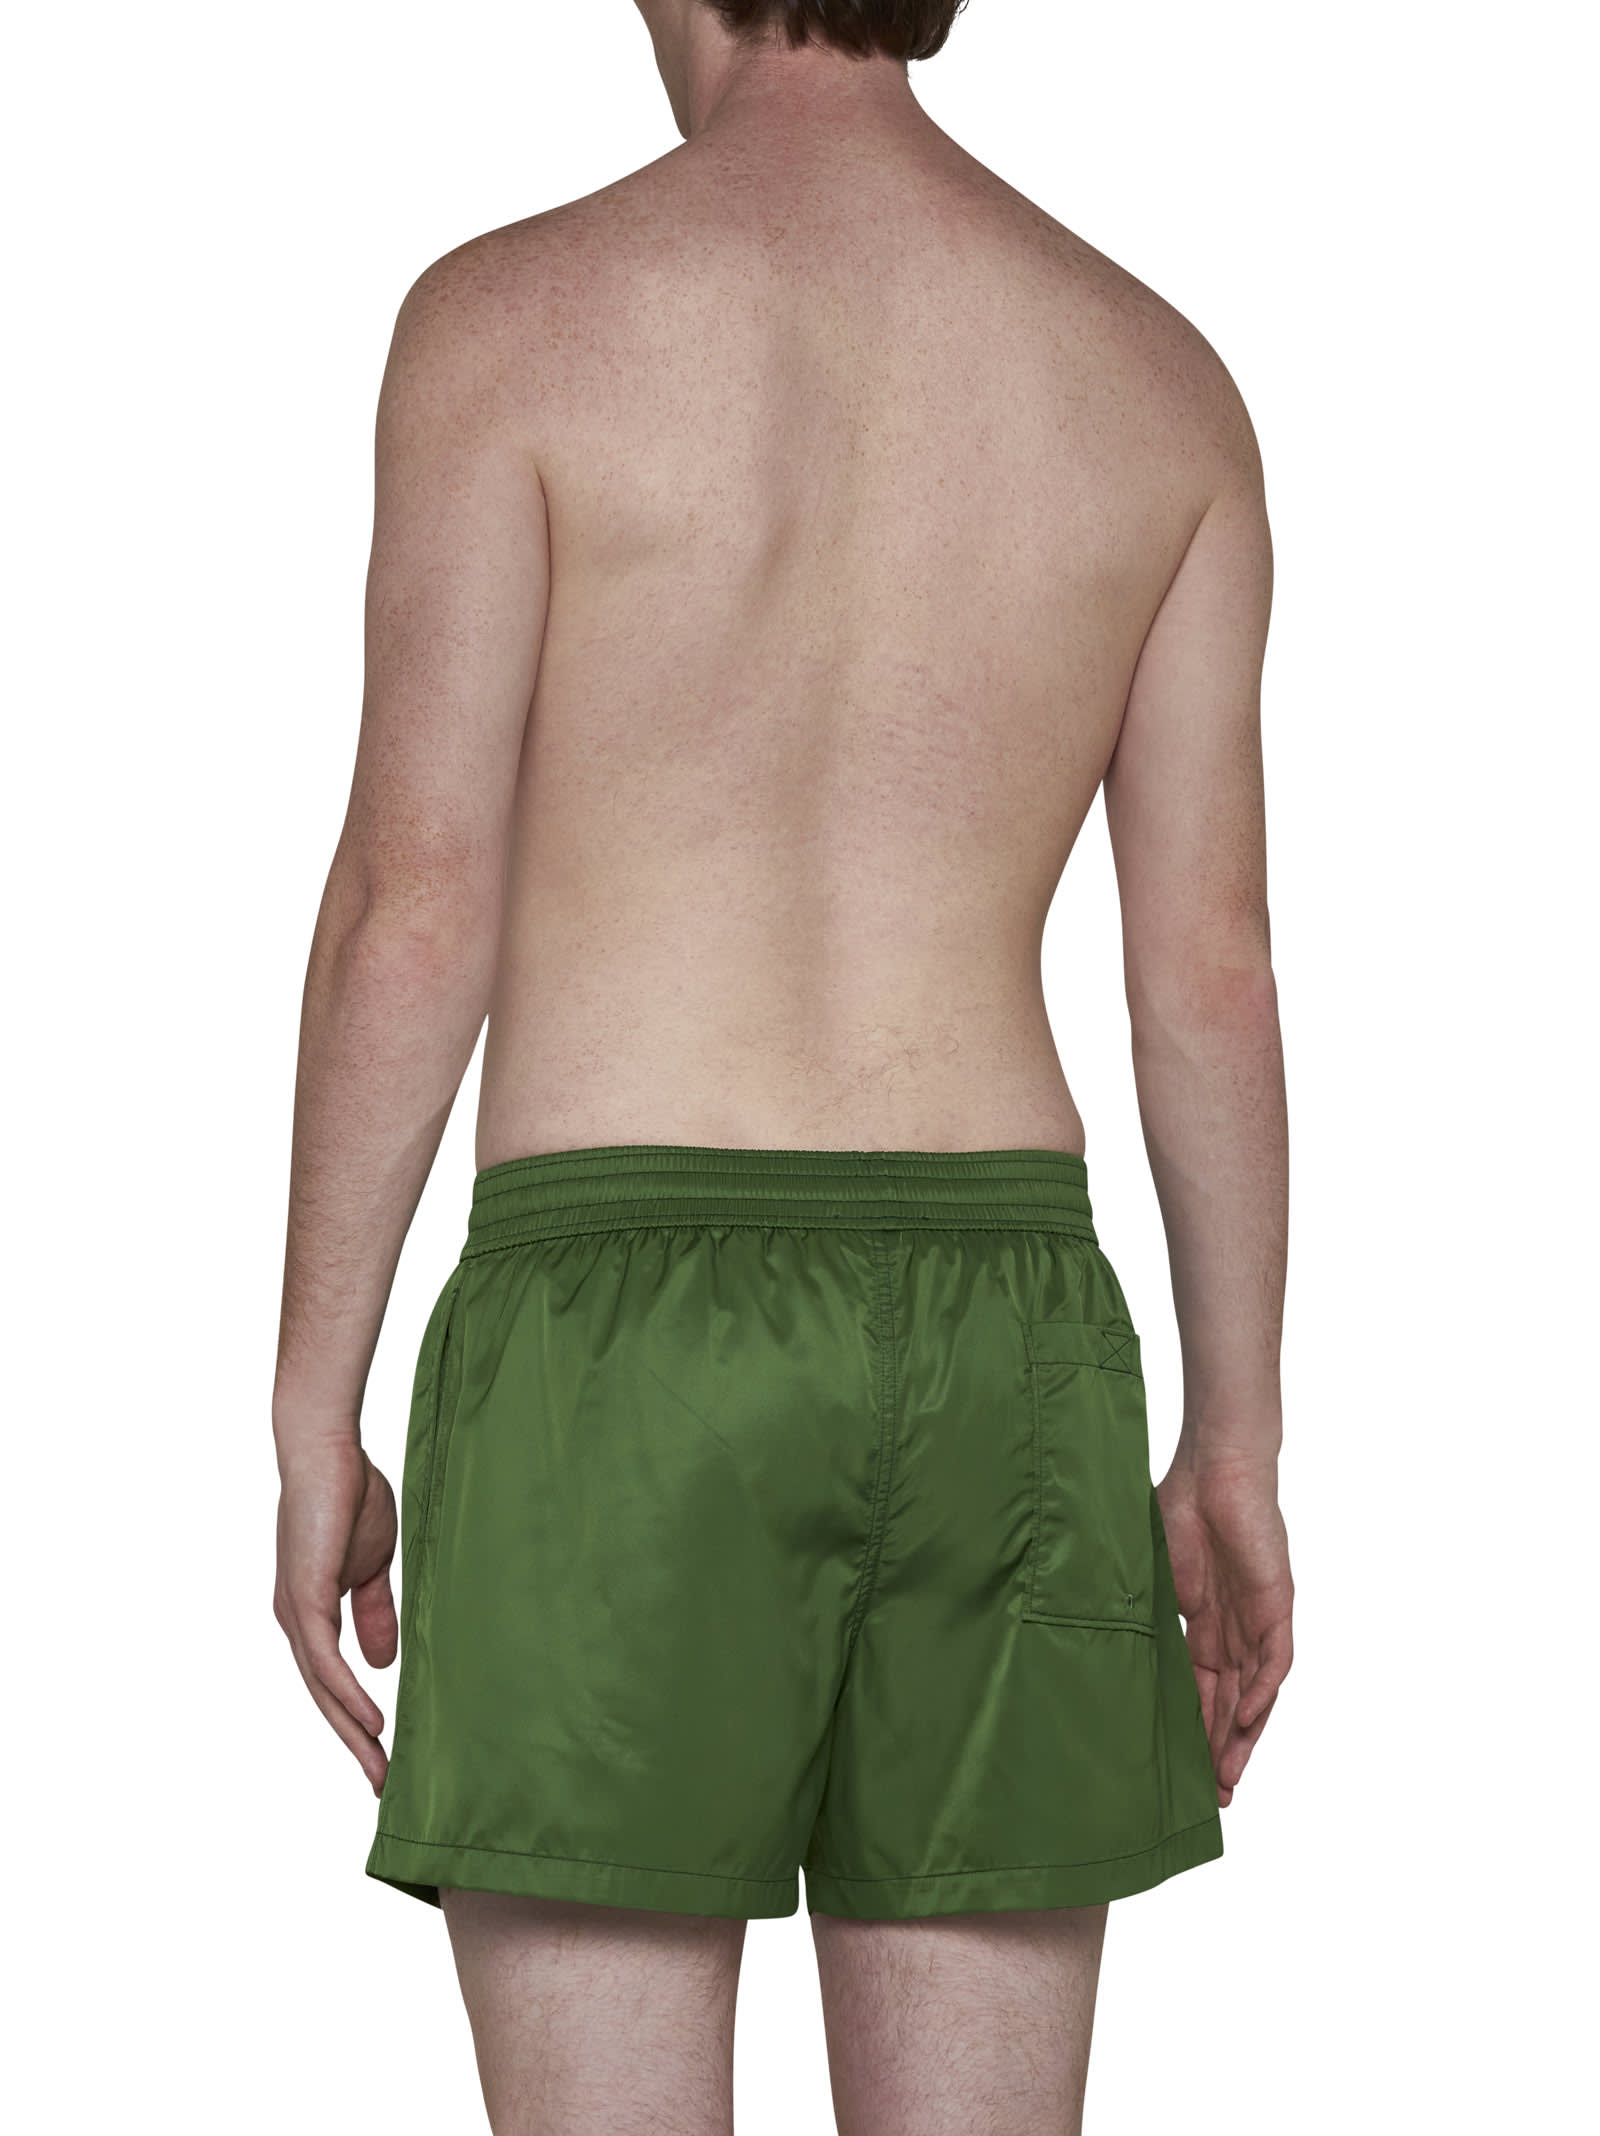 Shop Off-white Swimming Trunks In Willow Bough White